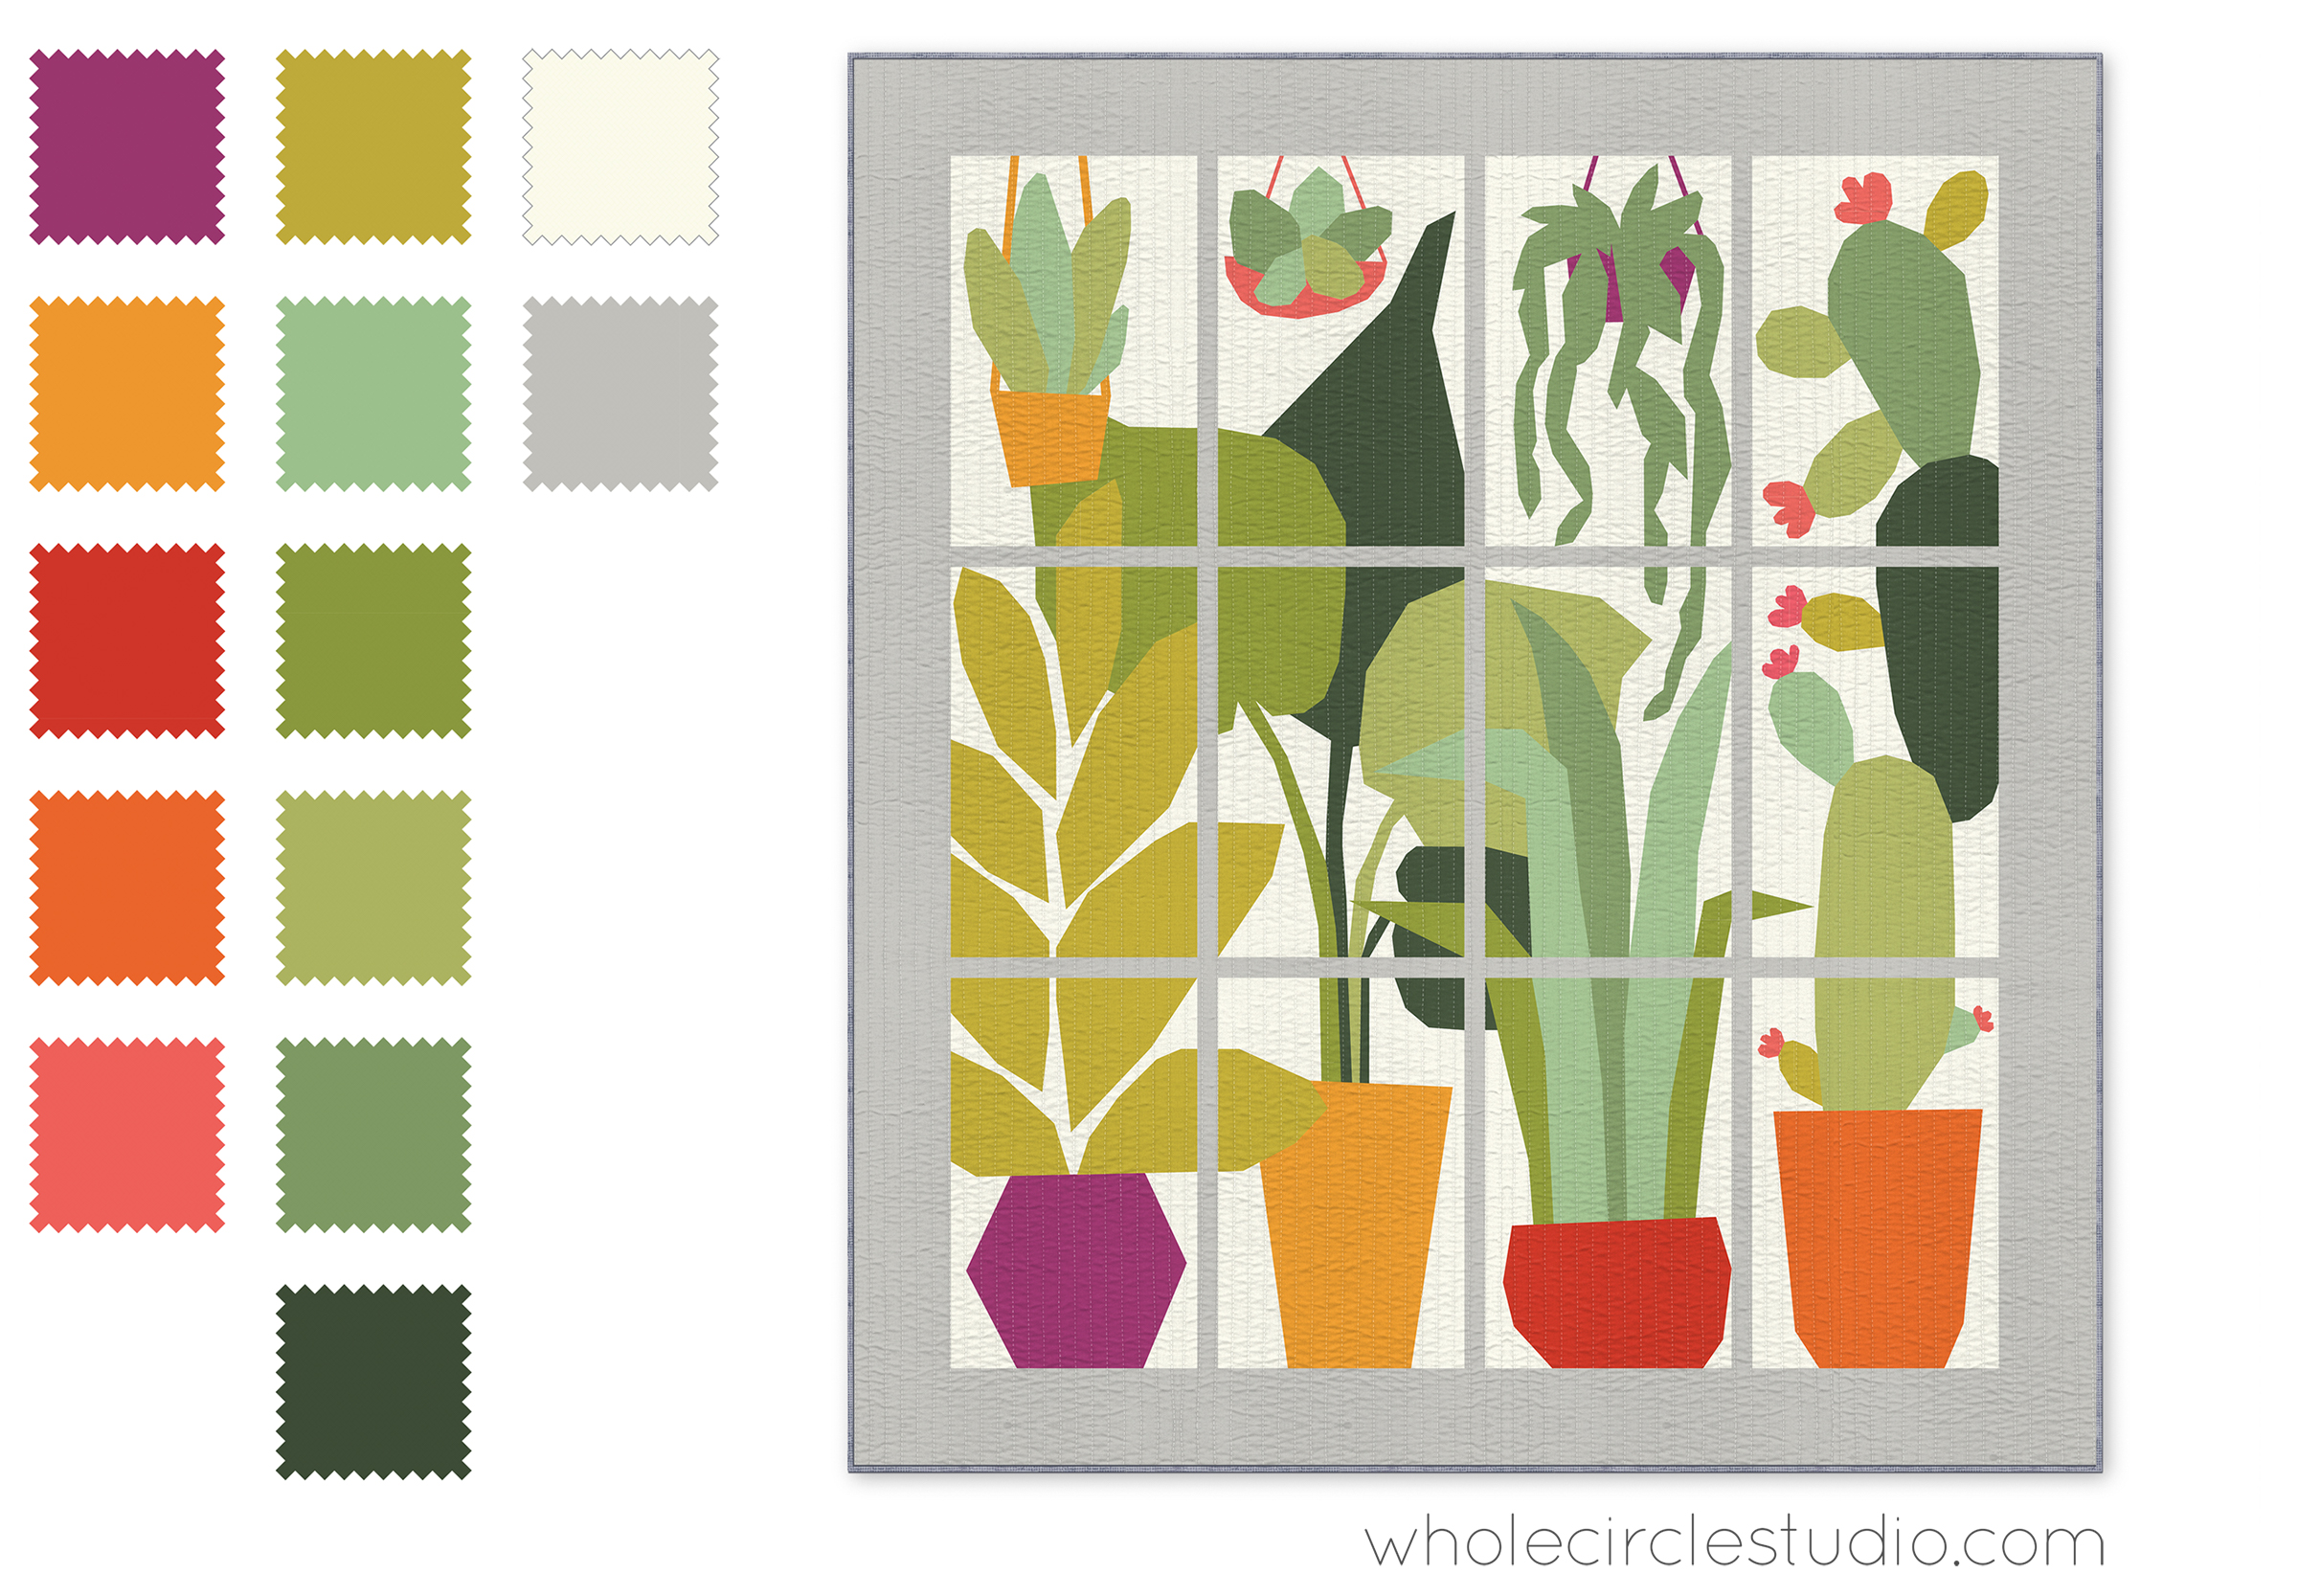 fabric swatches and illustration of Cactus and potted plants in a window.